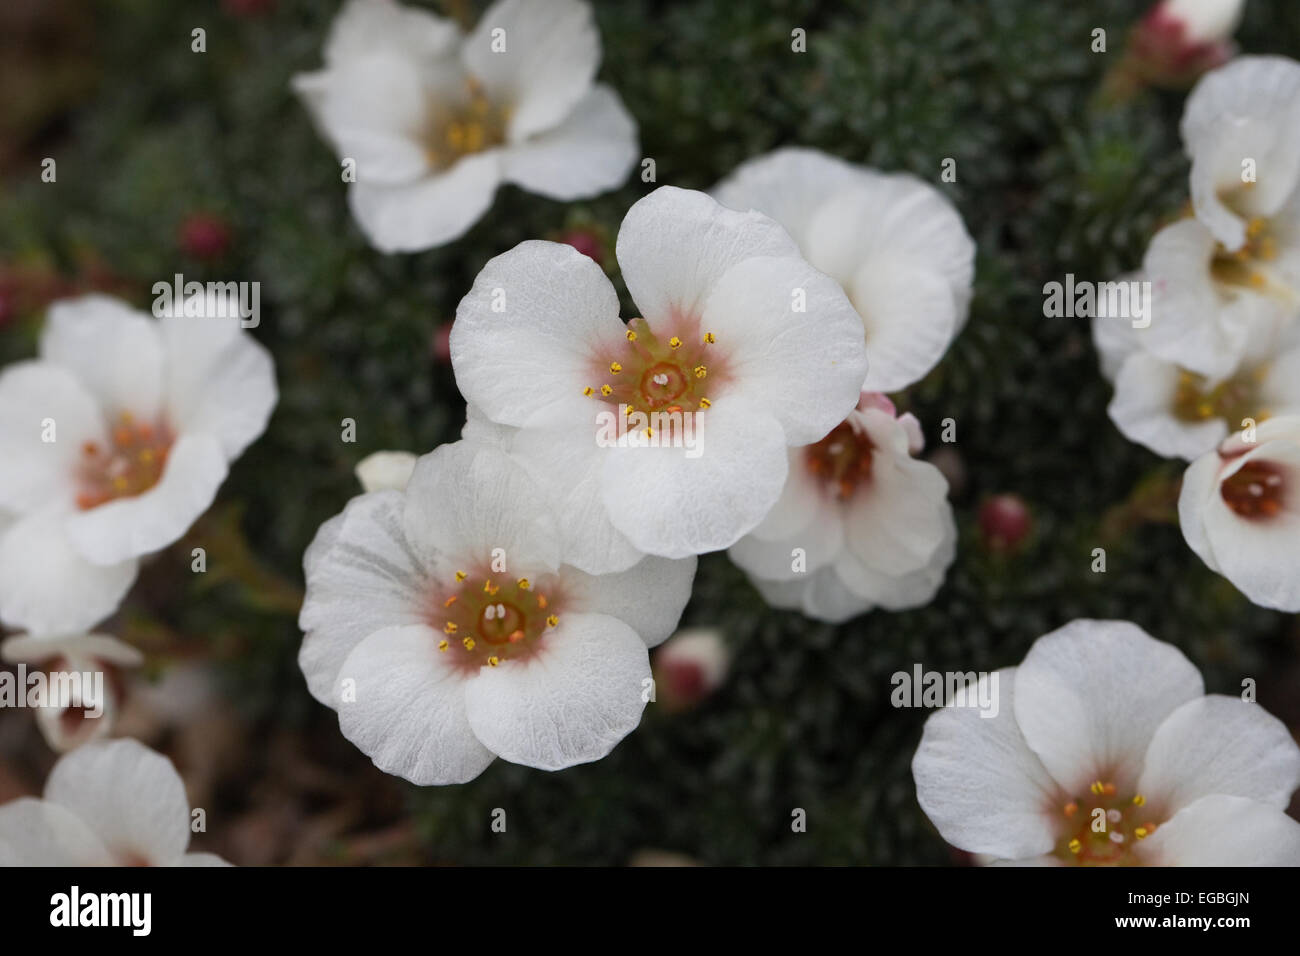 Saxifrage 'Joy Bishop' growing in a protected environment. Stock Photo